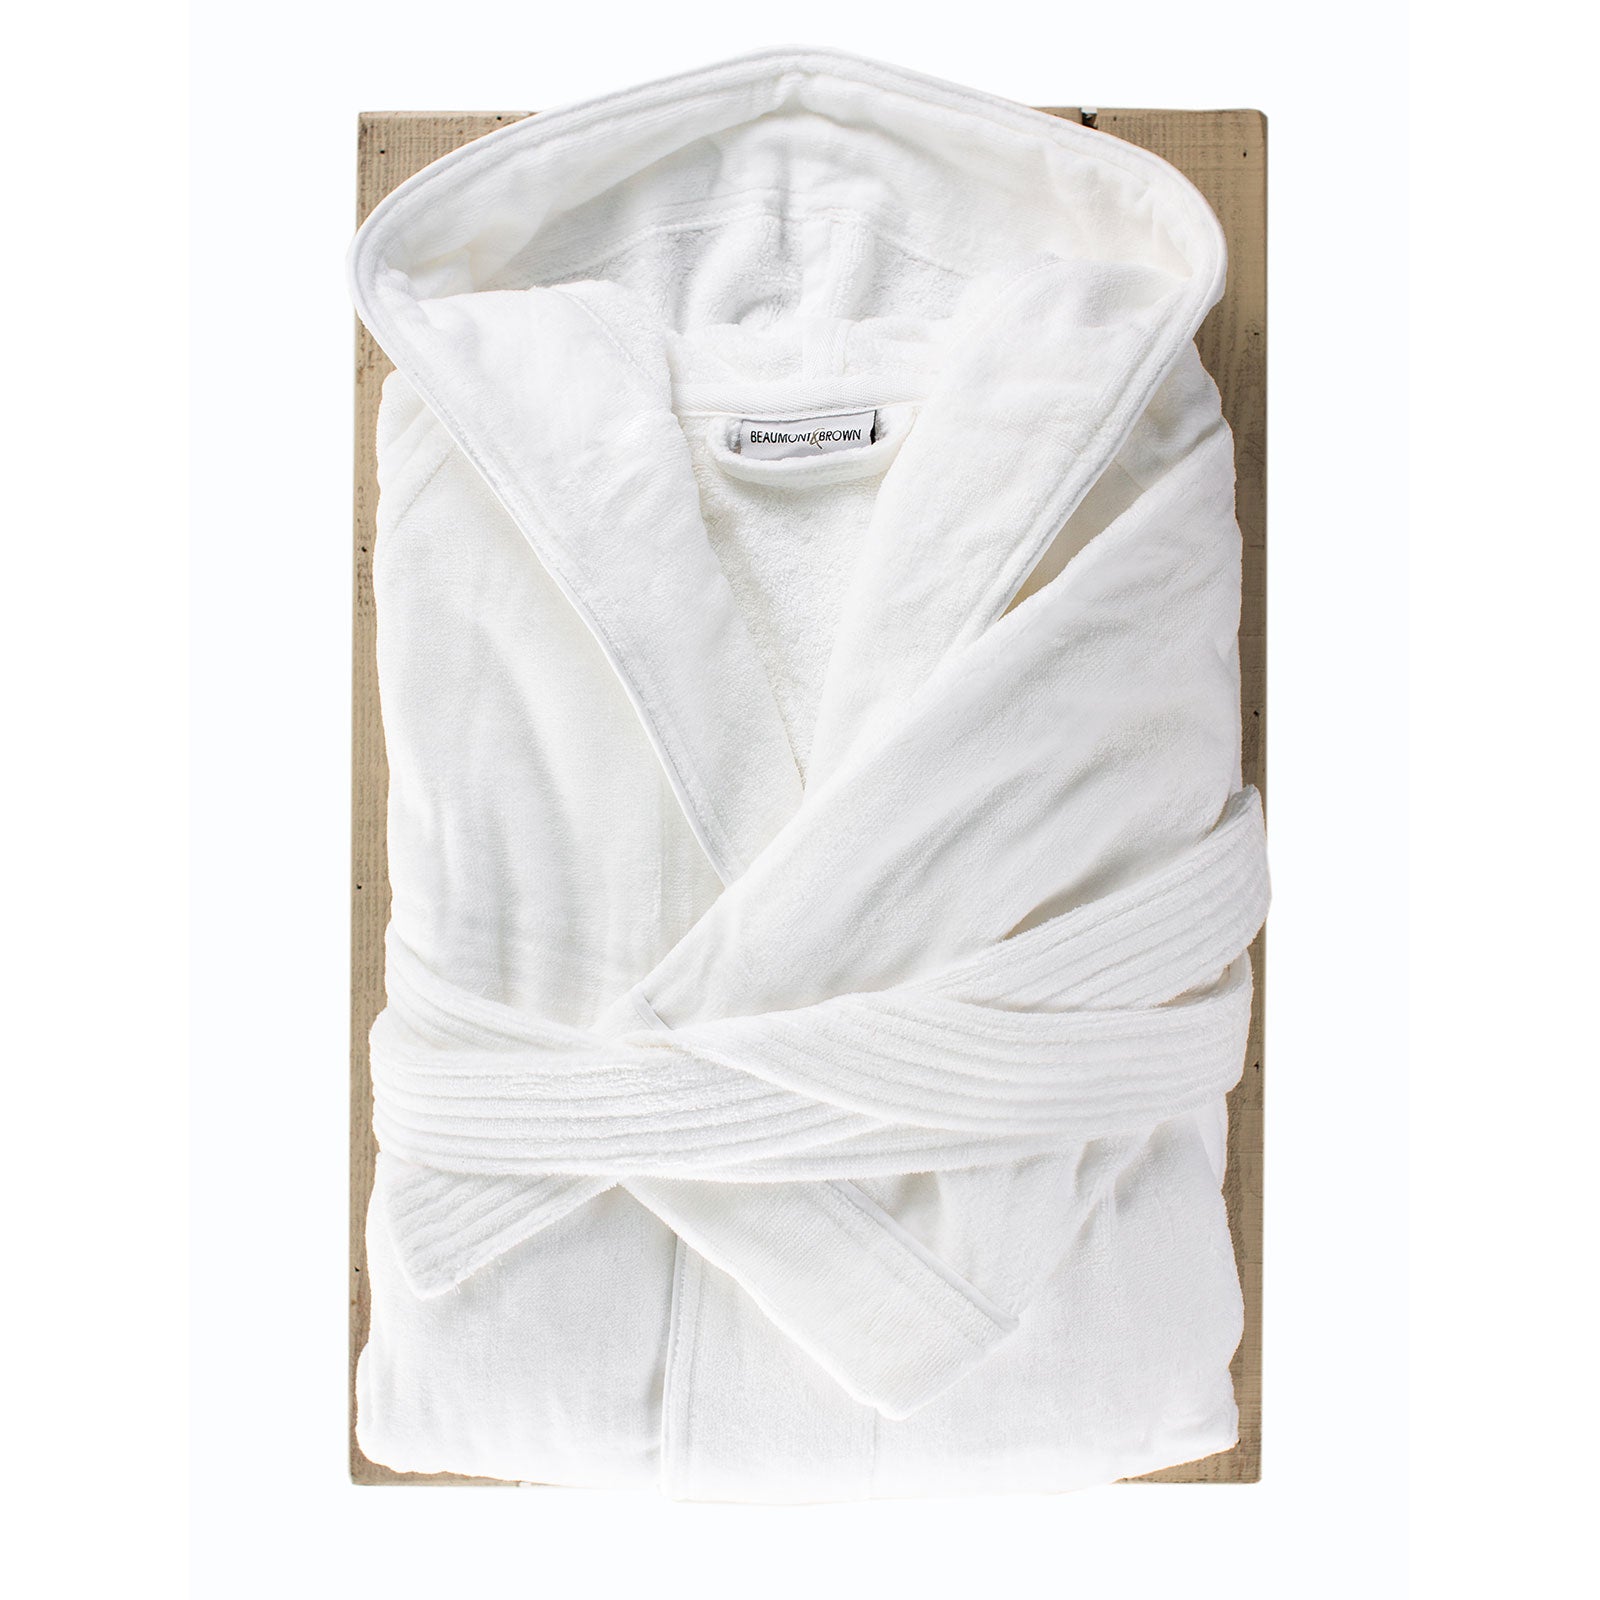 100% COTTON NIGHT WARE BATH ROBE TOWELLING DRESSING GOWN WITH BELT Kleidung  & Accessoires LA2045622